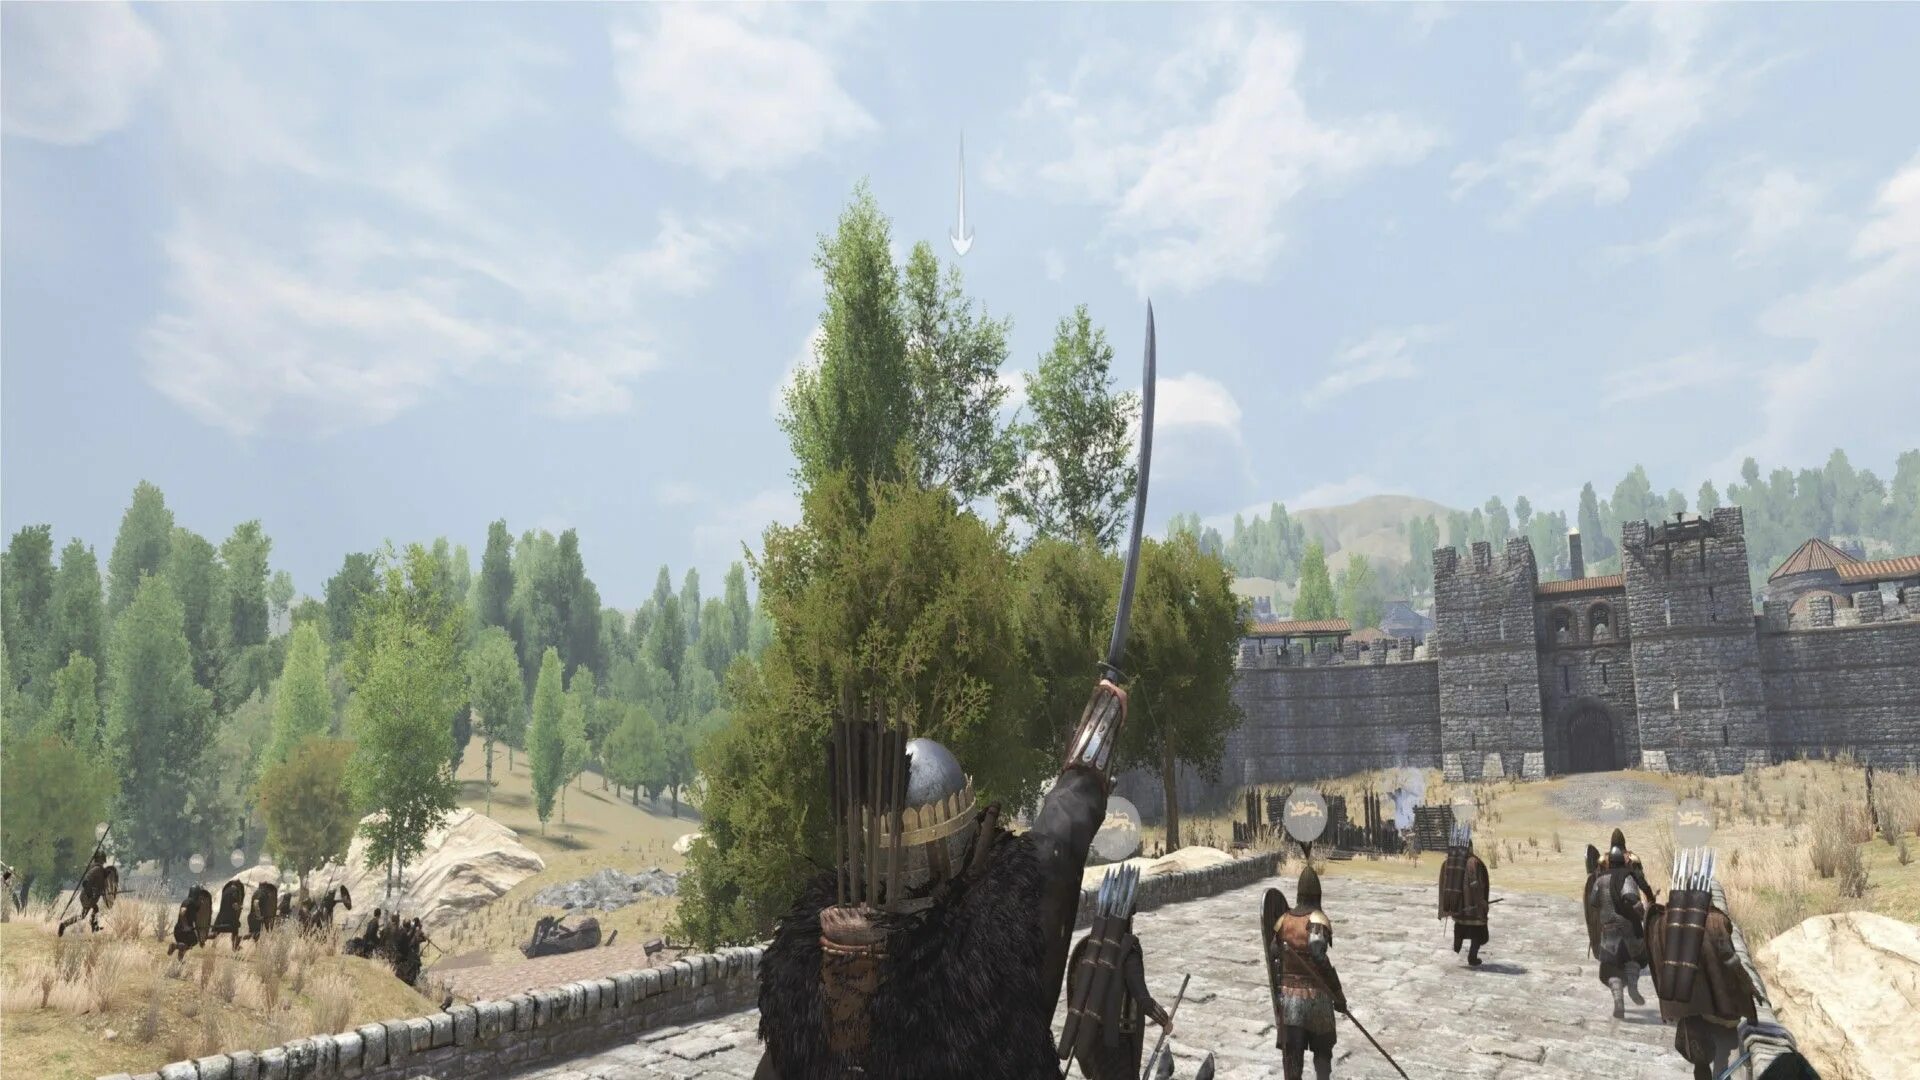 Mount and blade 2 bannerlord замки. Mount and Blade 2 Bannerlord. Mount and Blade 2 Bannerlord старт. Mount & Blade II: Bannerlord (2022) PC. Mount and Blade 2 Bannerlord аваситон.